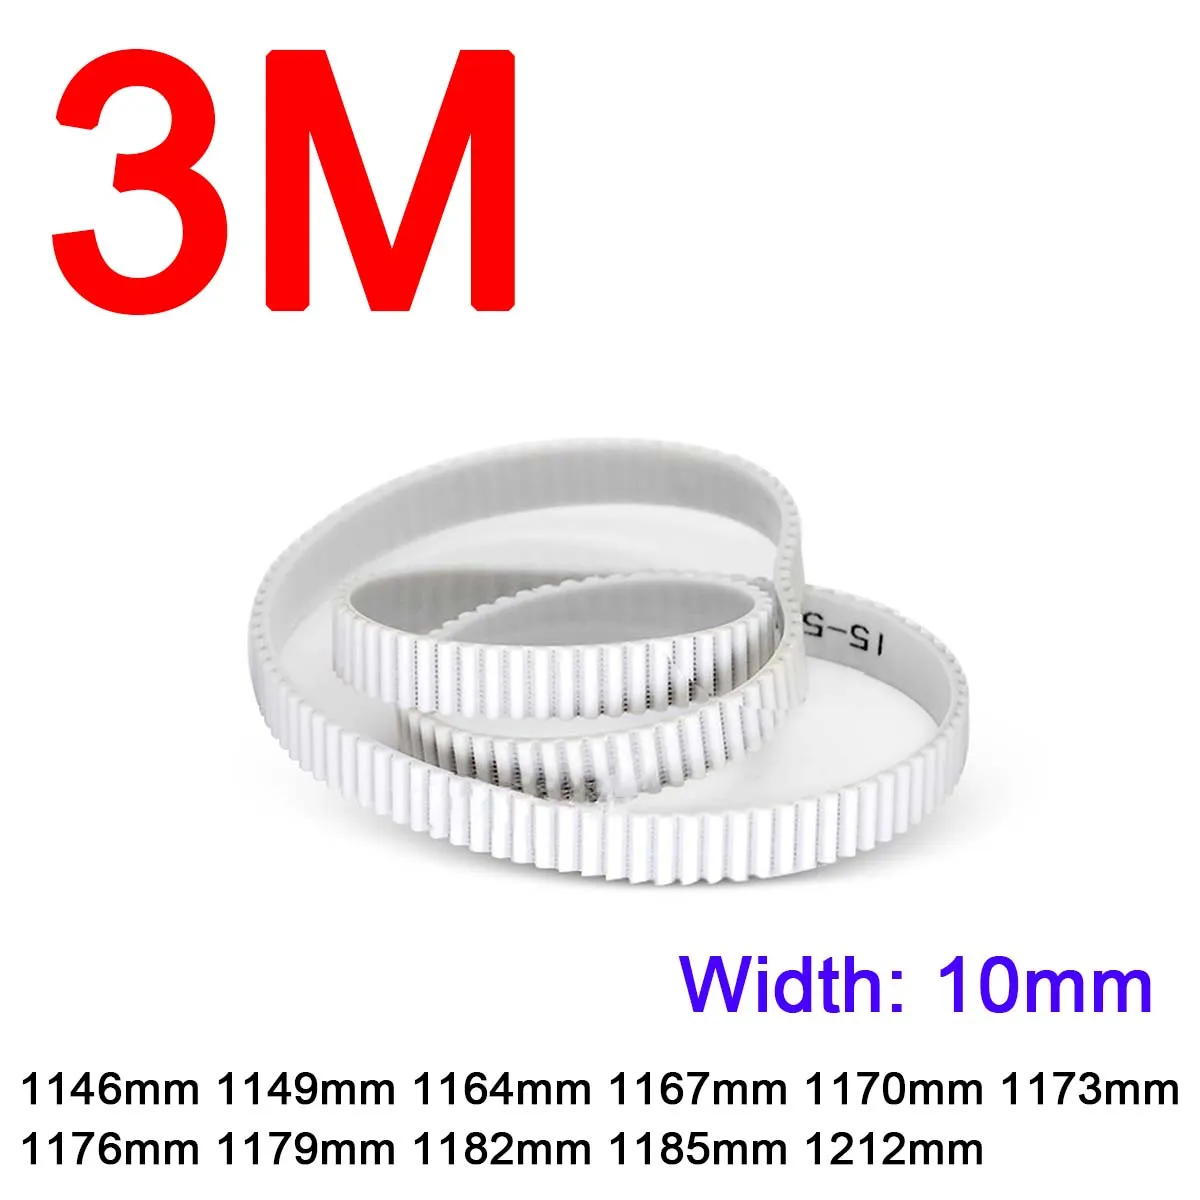 

1Pc Width 10mm 3M White Polyurethane PU Tooth Timing Belt Pitch Length 1146 1149 1164 1167 1170 1173 1176 1179 1182 1185 1212mm